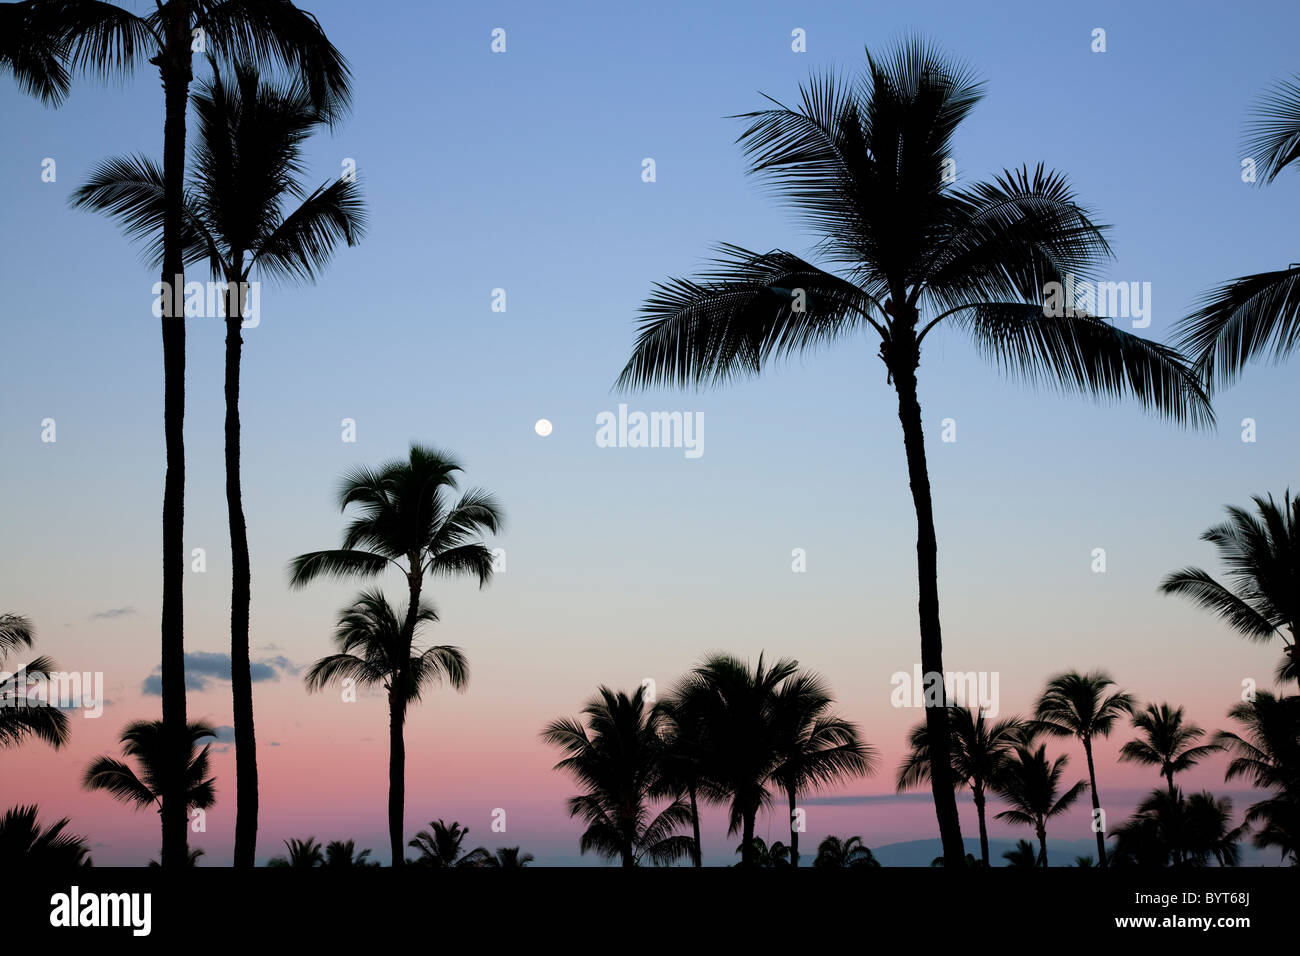 Full moon over palm trees with sunrise in Maui, Hawaii. Stock Photo